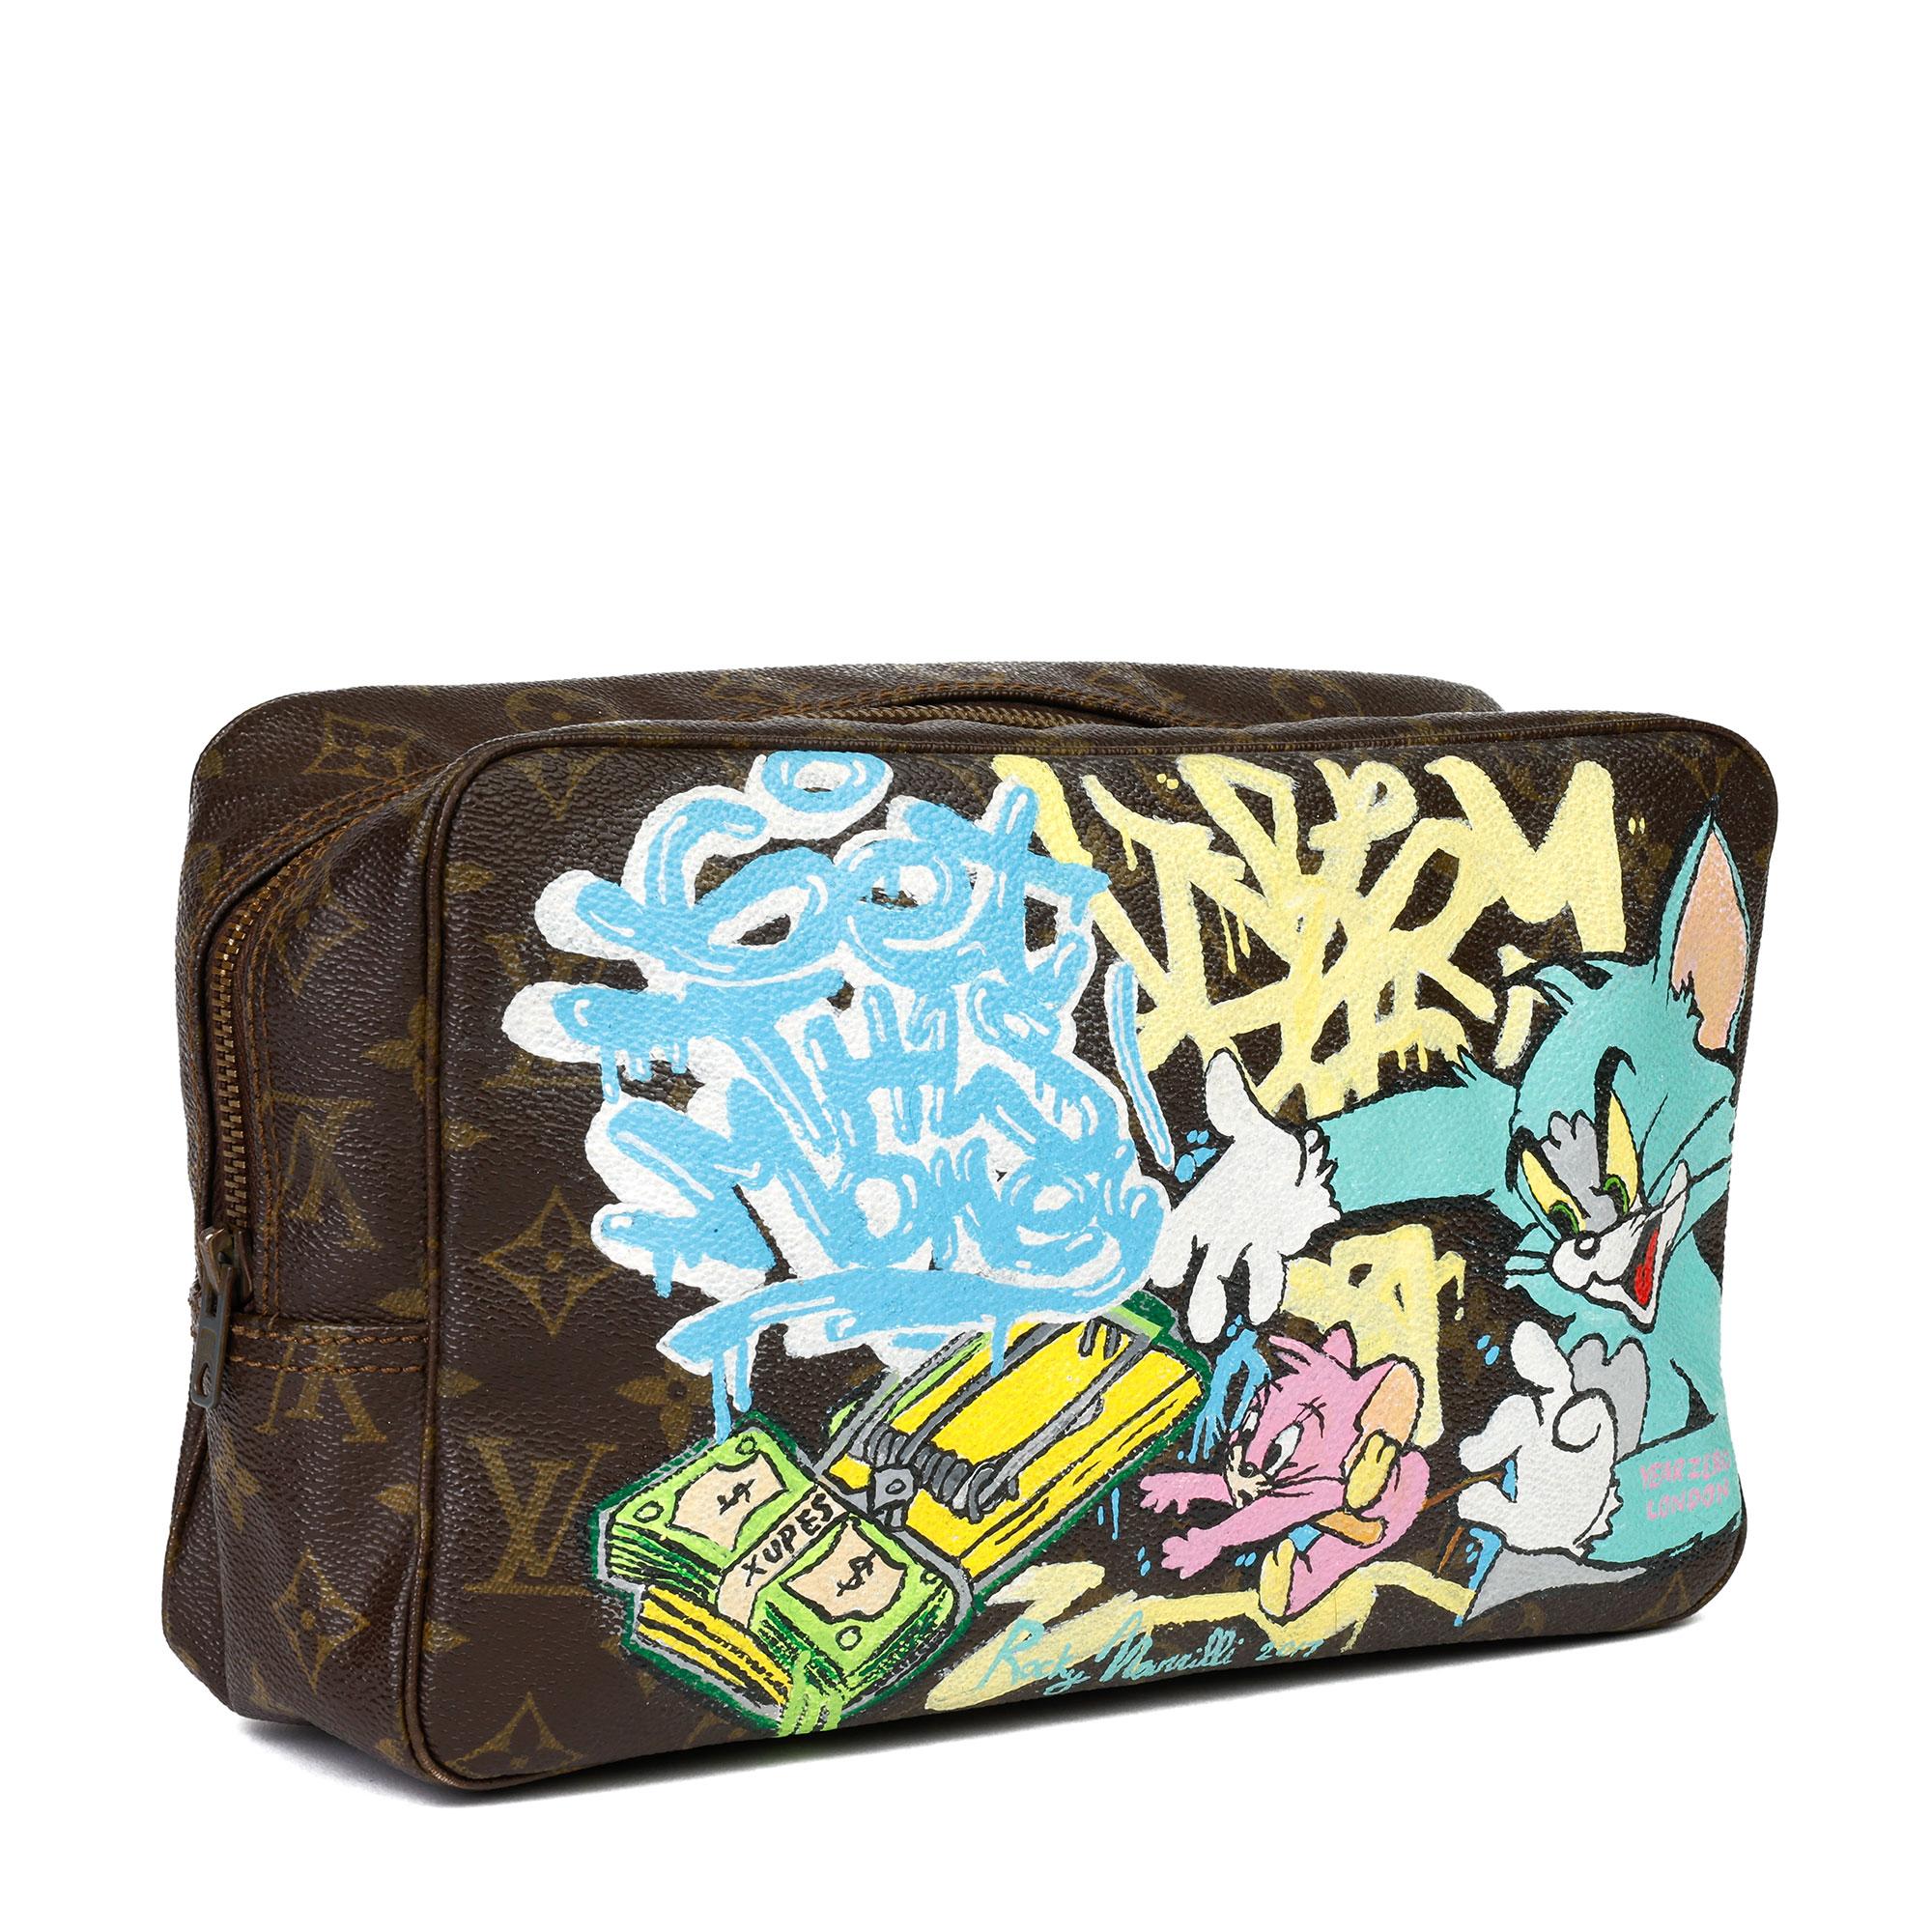 Gray Louis Vuitton Hand-painted 'Get This Money' X Year Zero London Toiletry Pouch